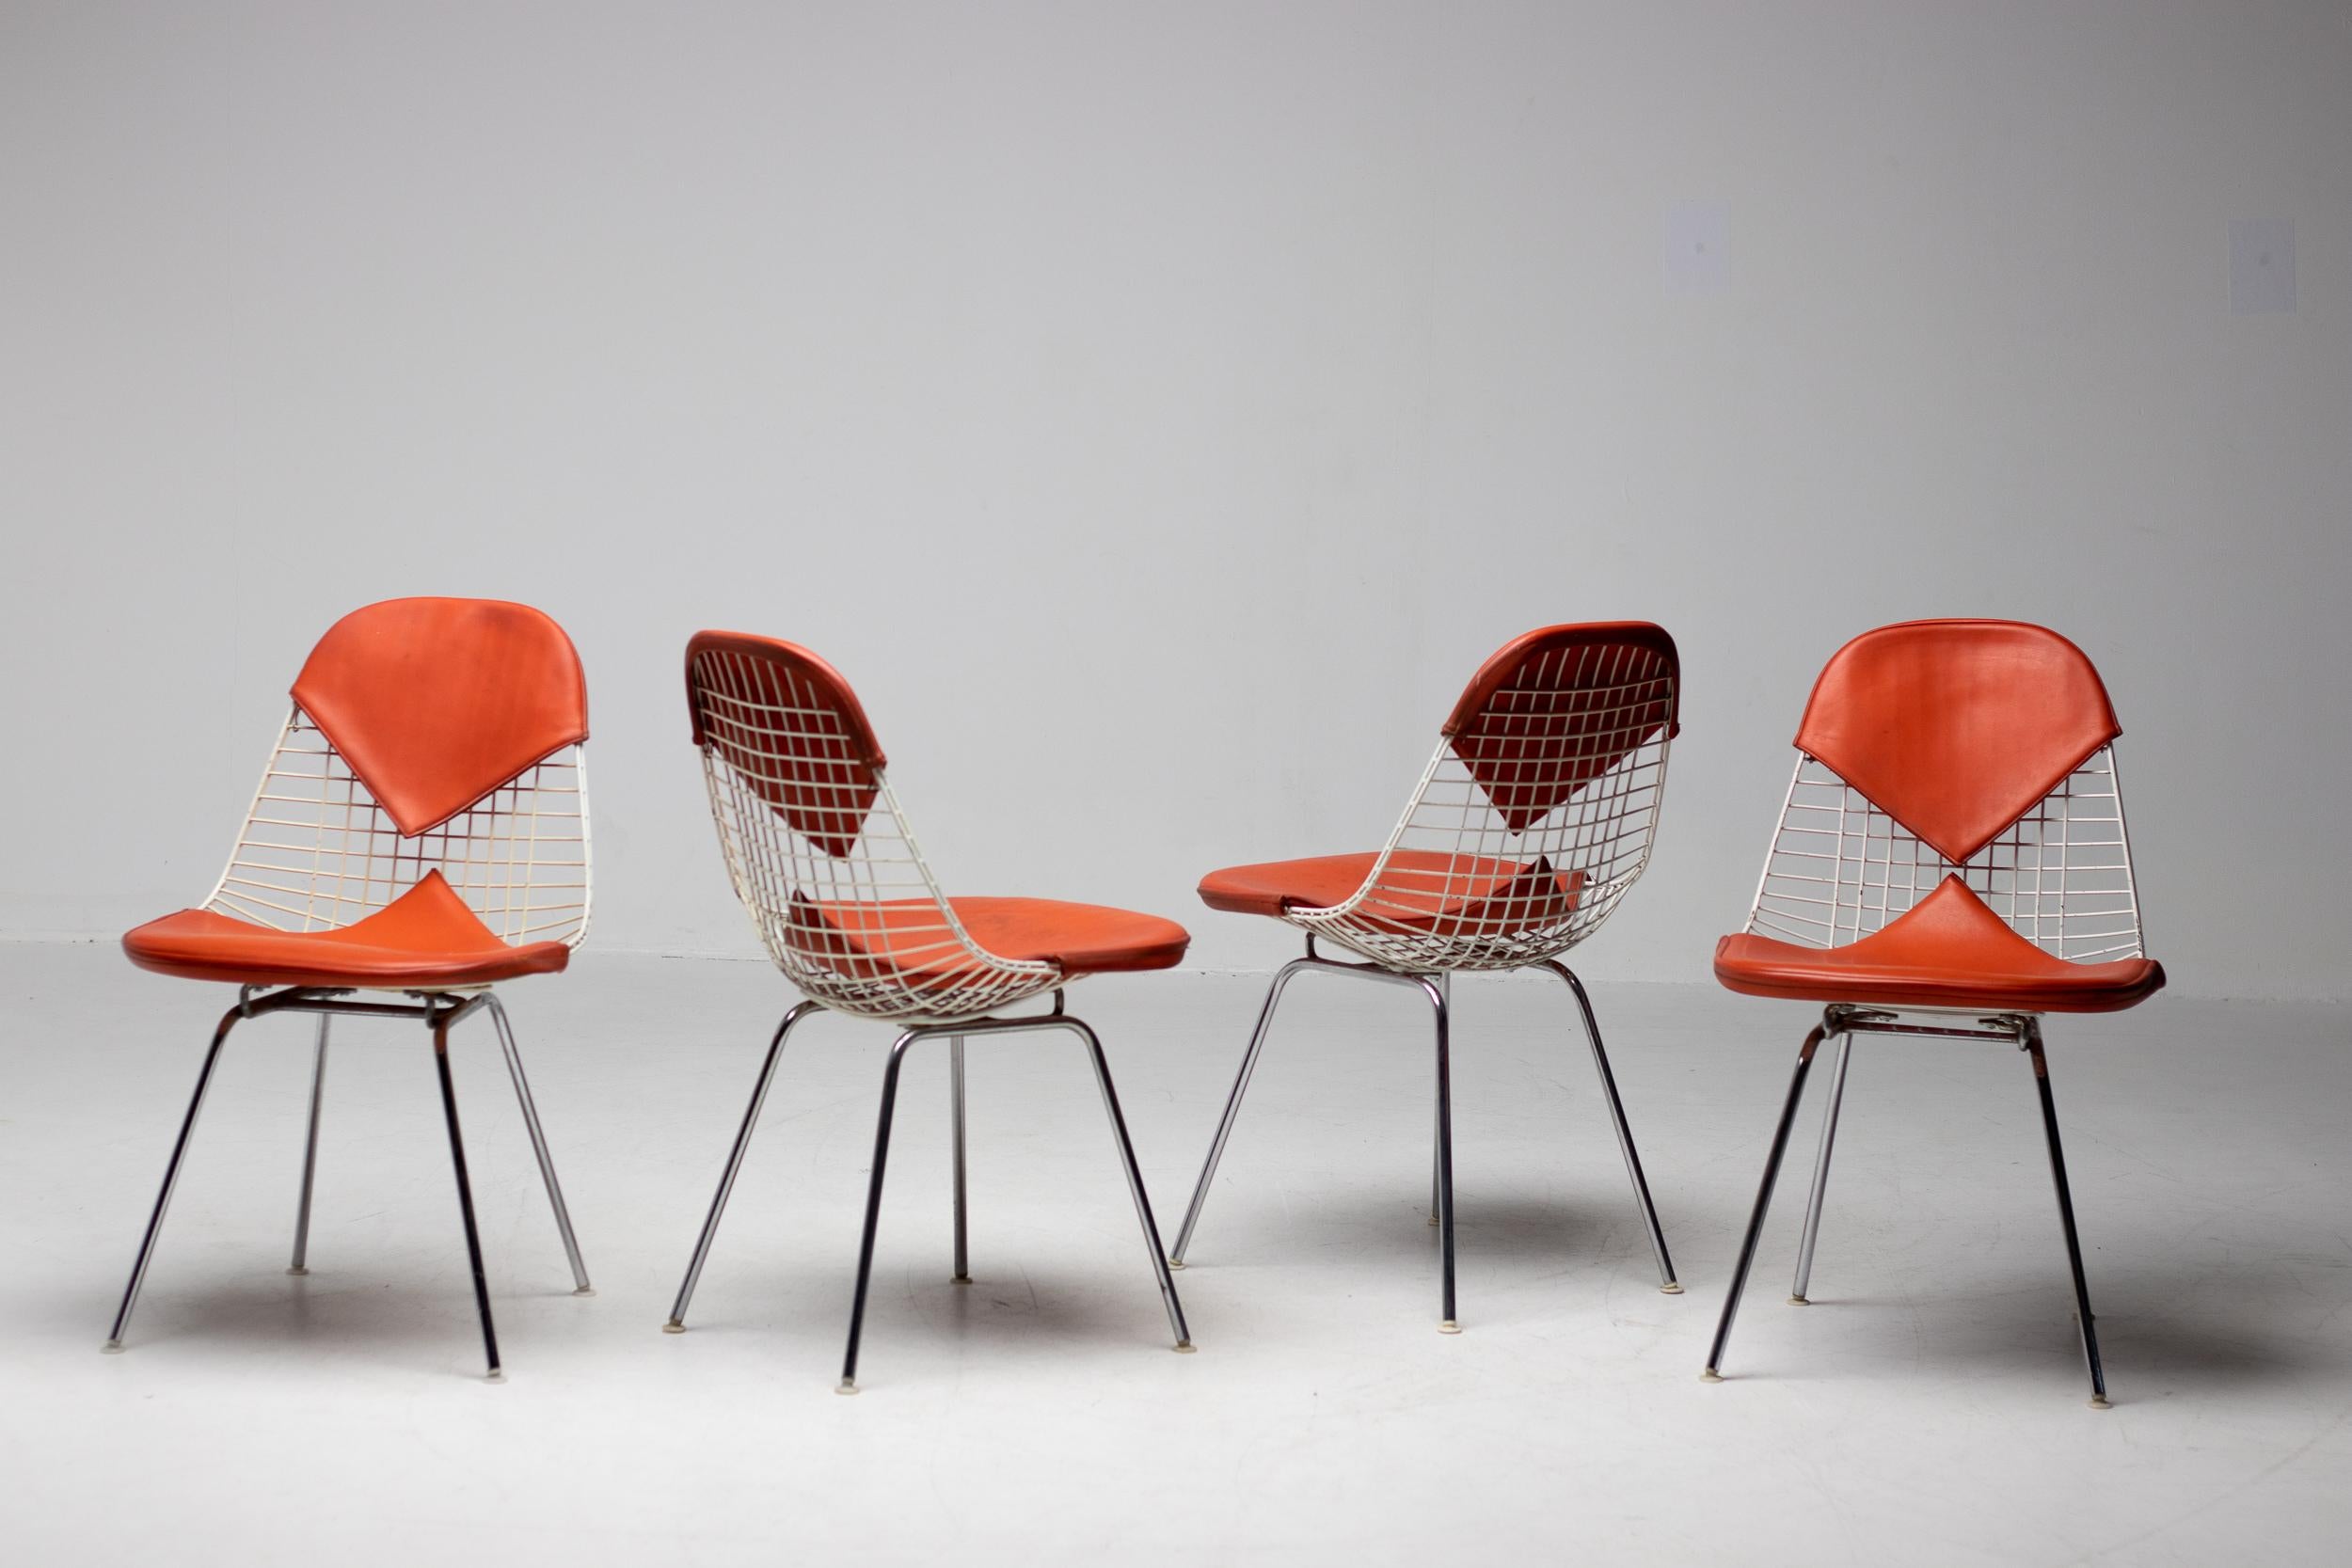 Steel Set of Four Eames DKR Chairs for Herman Miller with Original Girard Upholstery